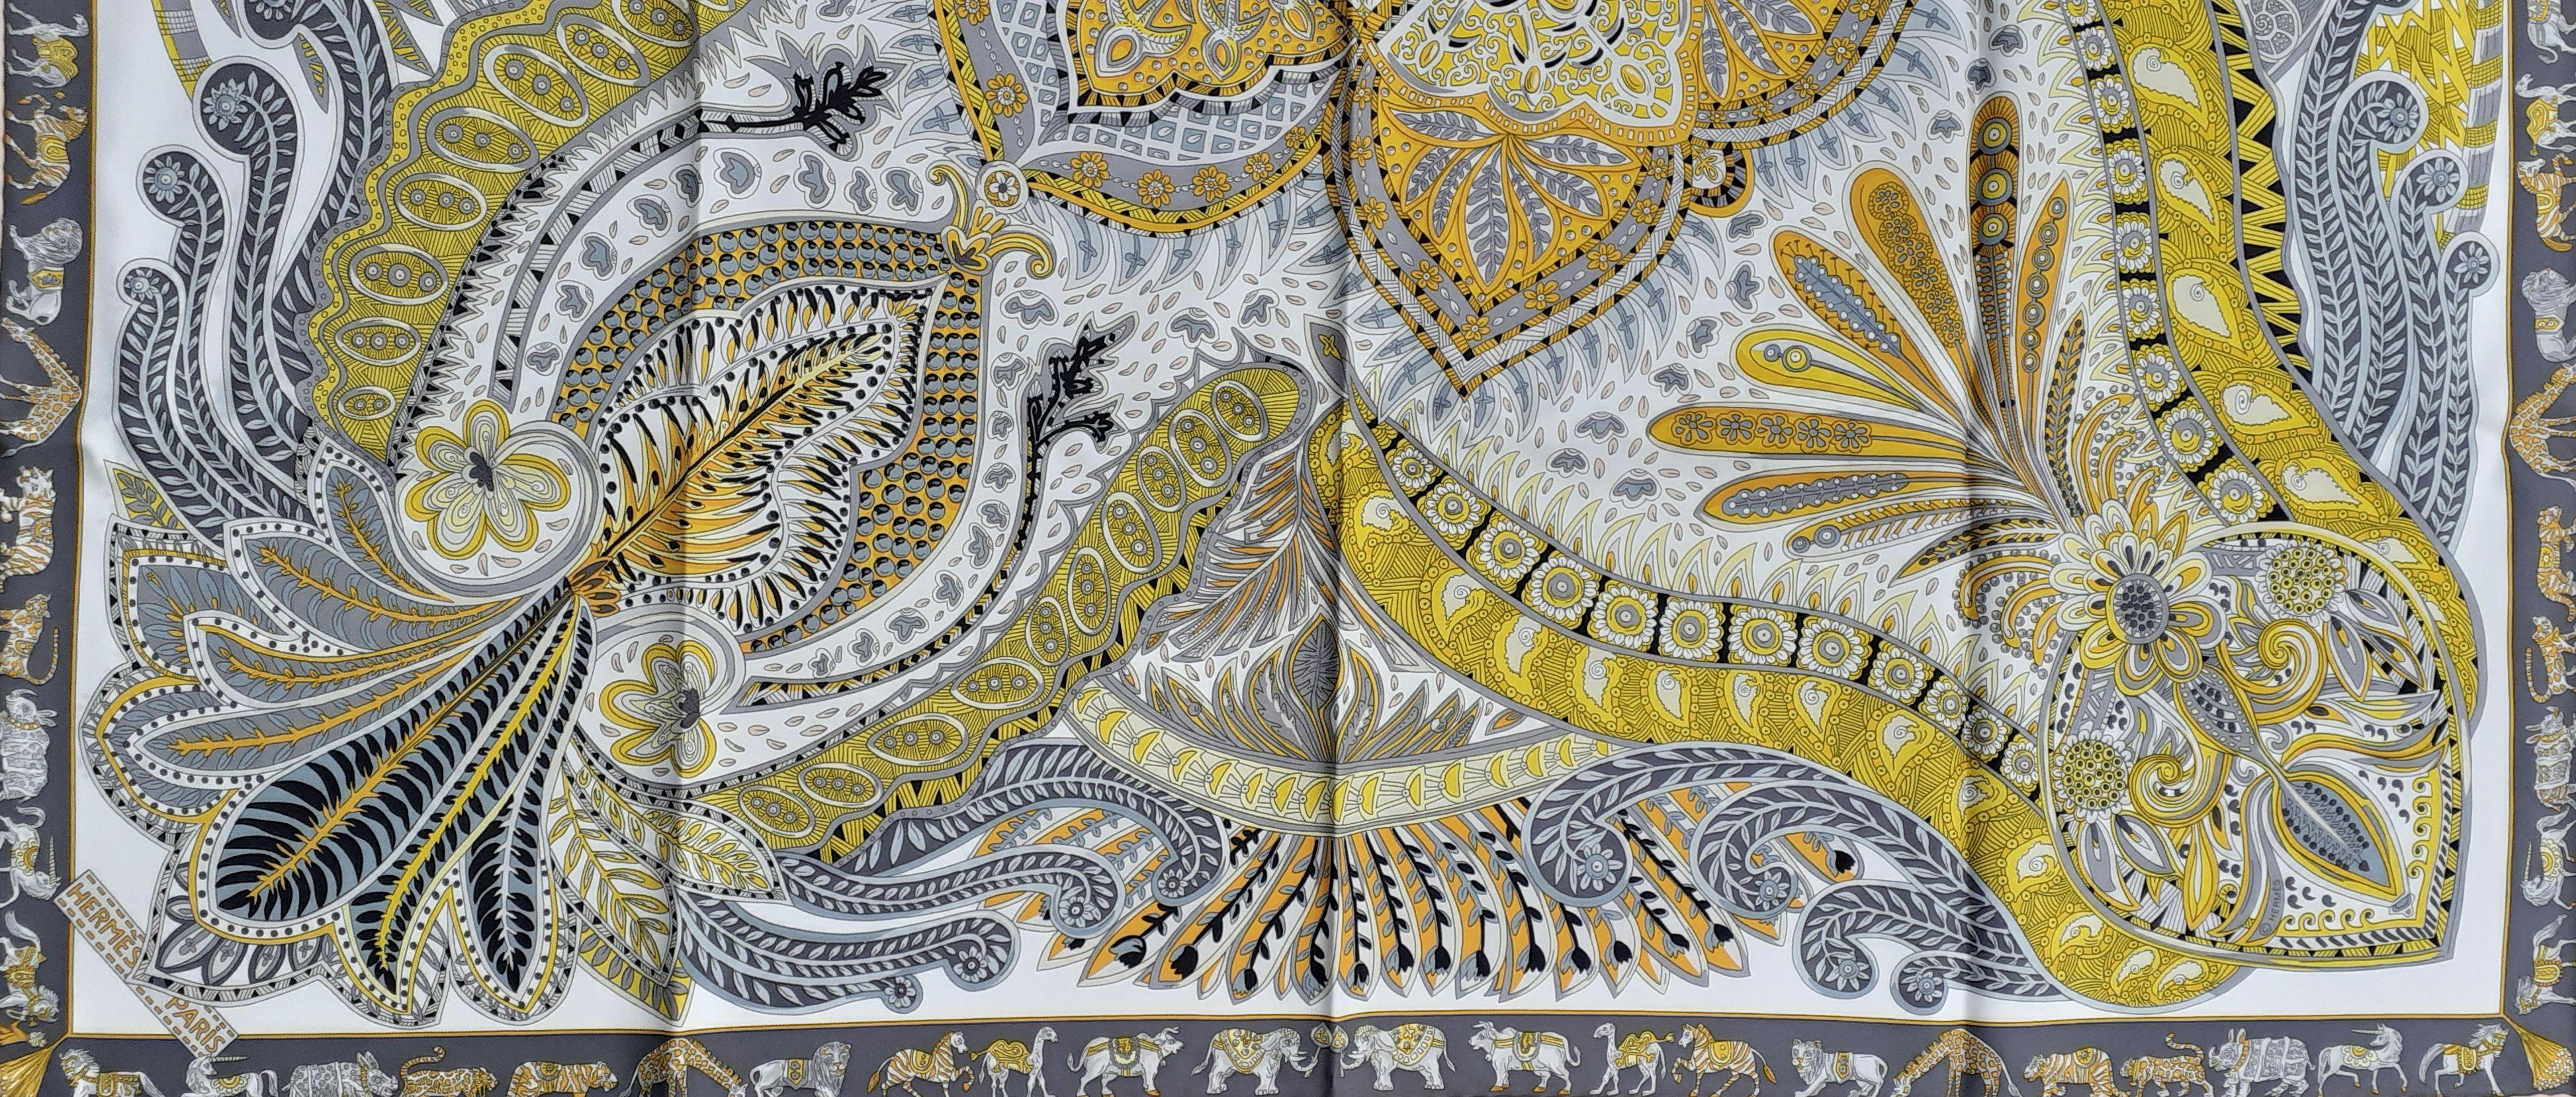 Absolutely Gorgeous Authentic Hermès Scarf

Pattern: 